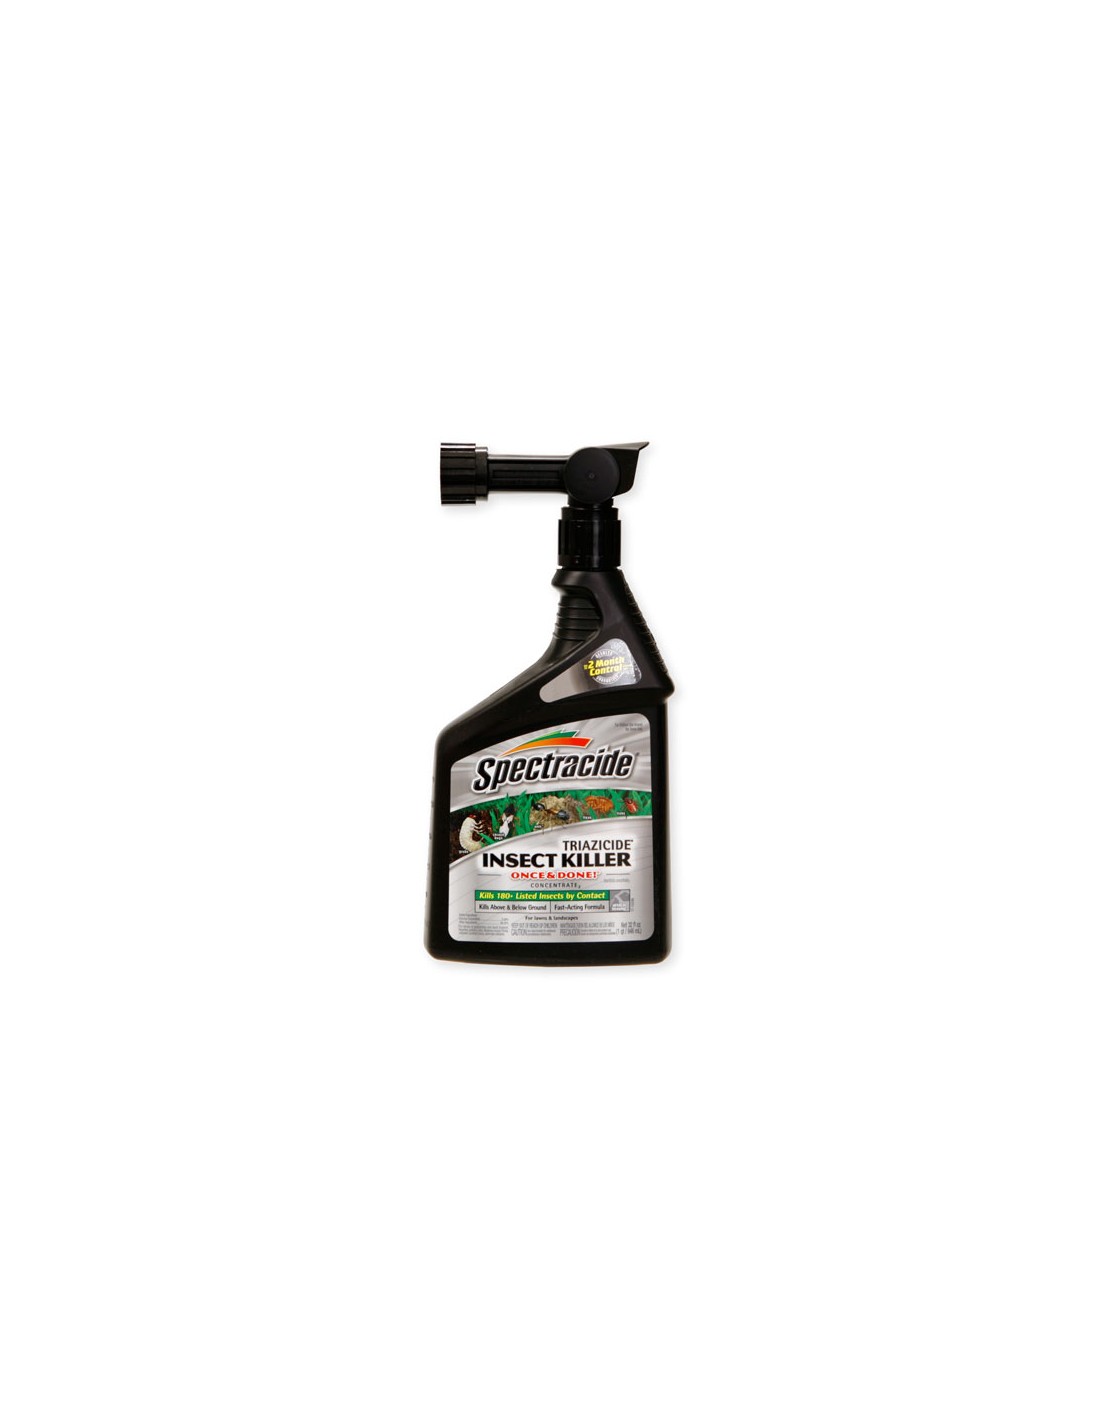 Do any of product have a longer spray to reach those hard areas.